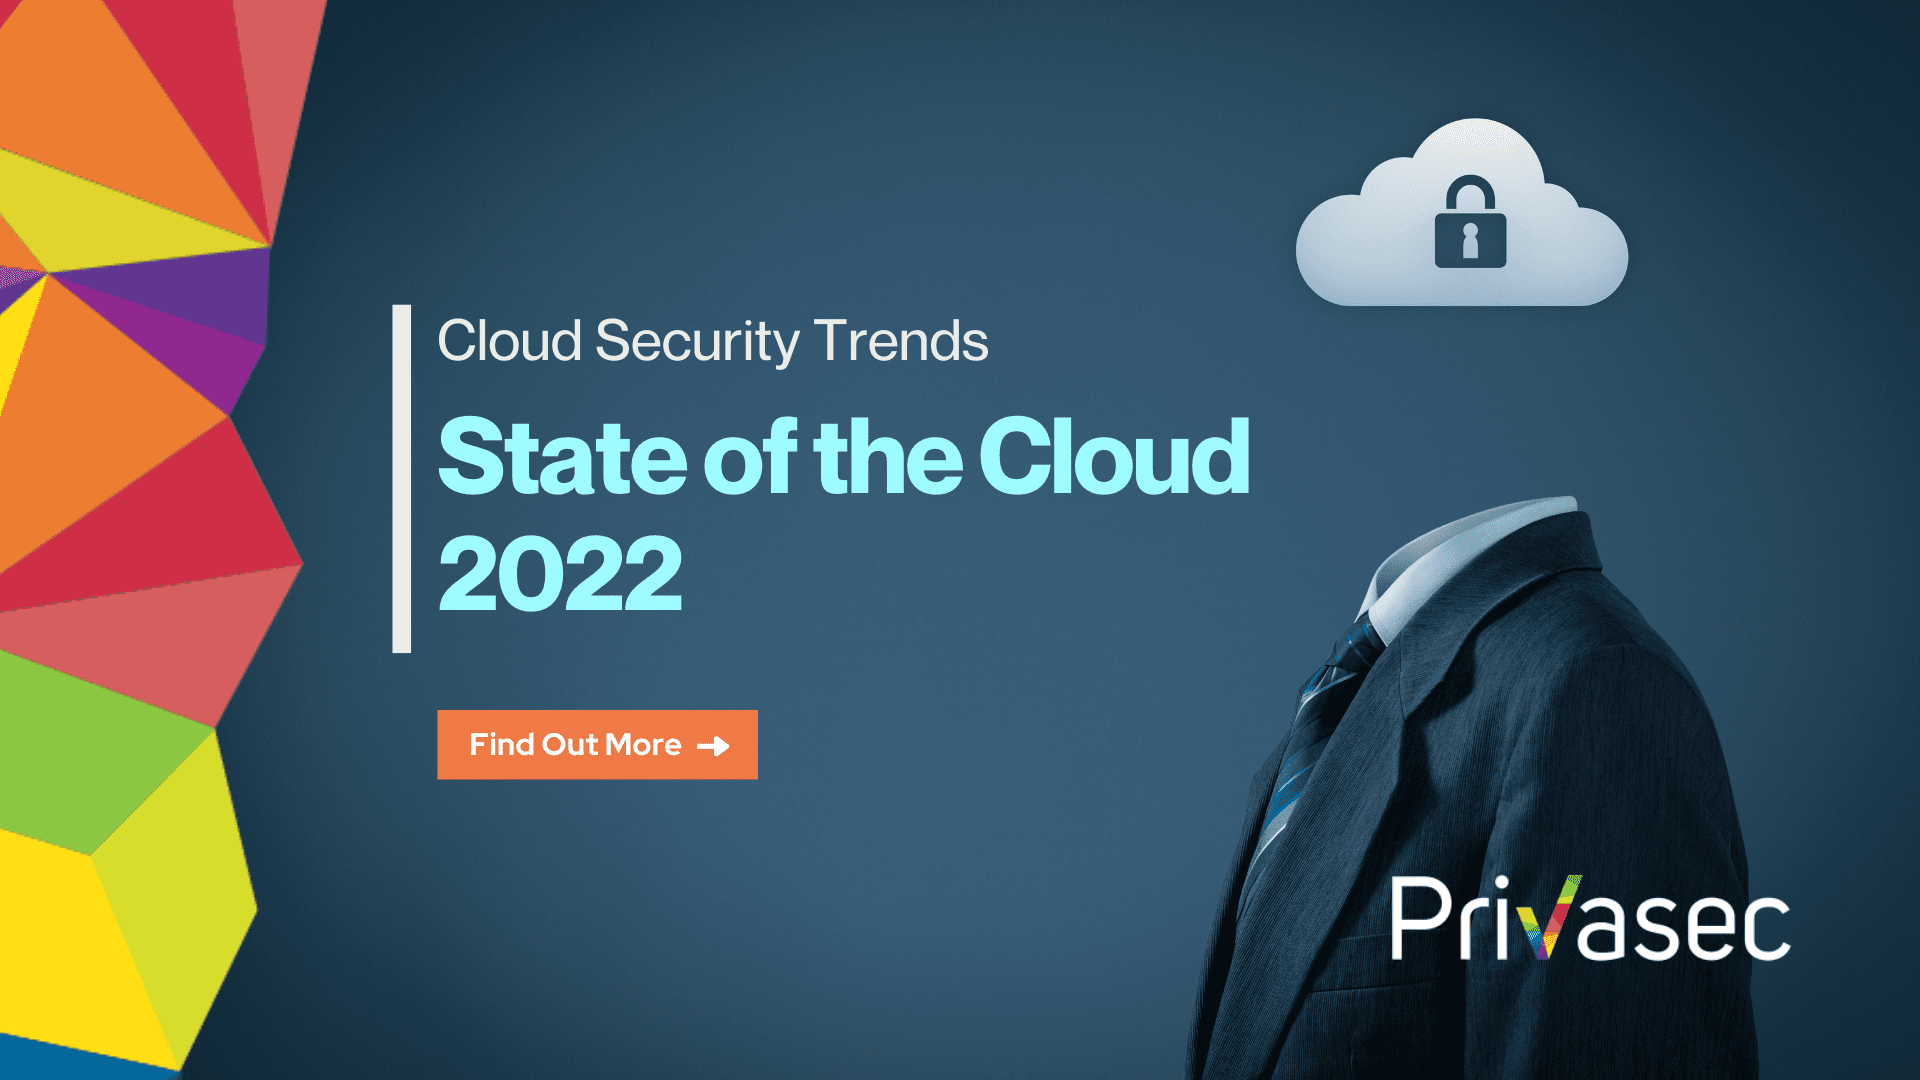 State of the Cloud 2022 - Cloud Security Trends you should take note of